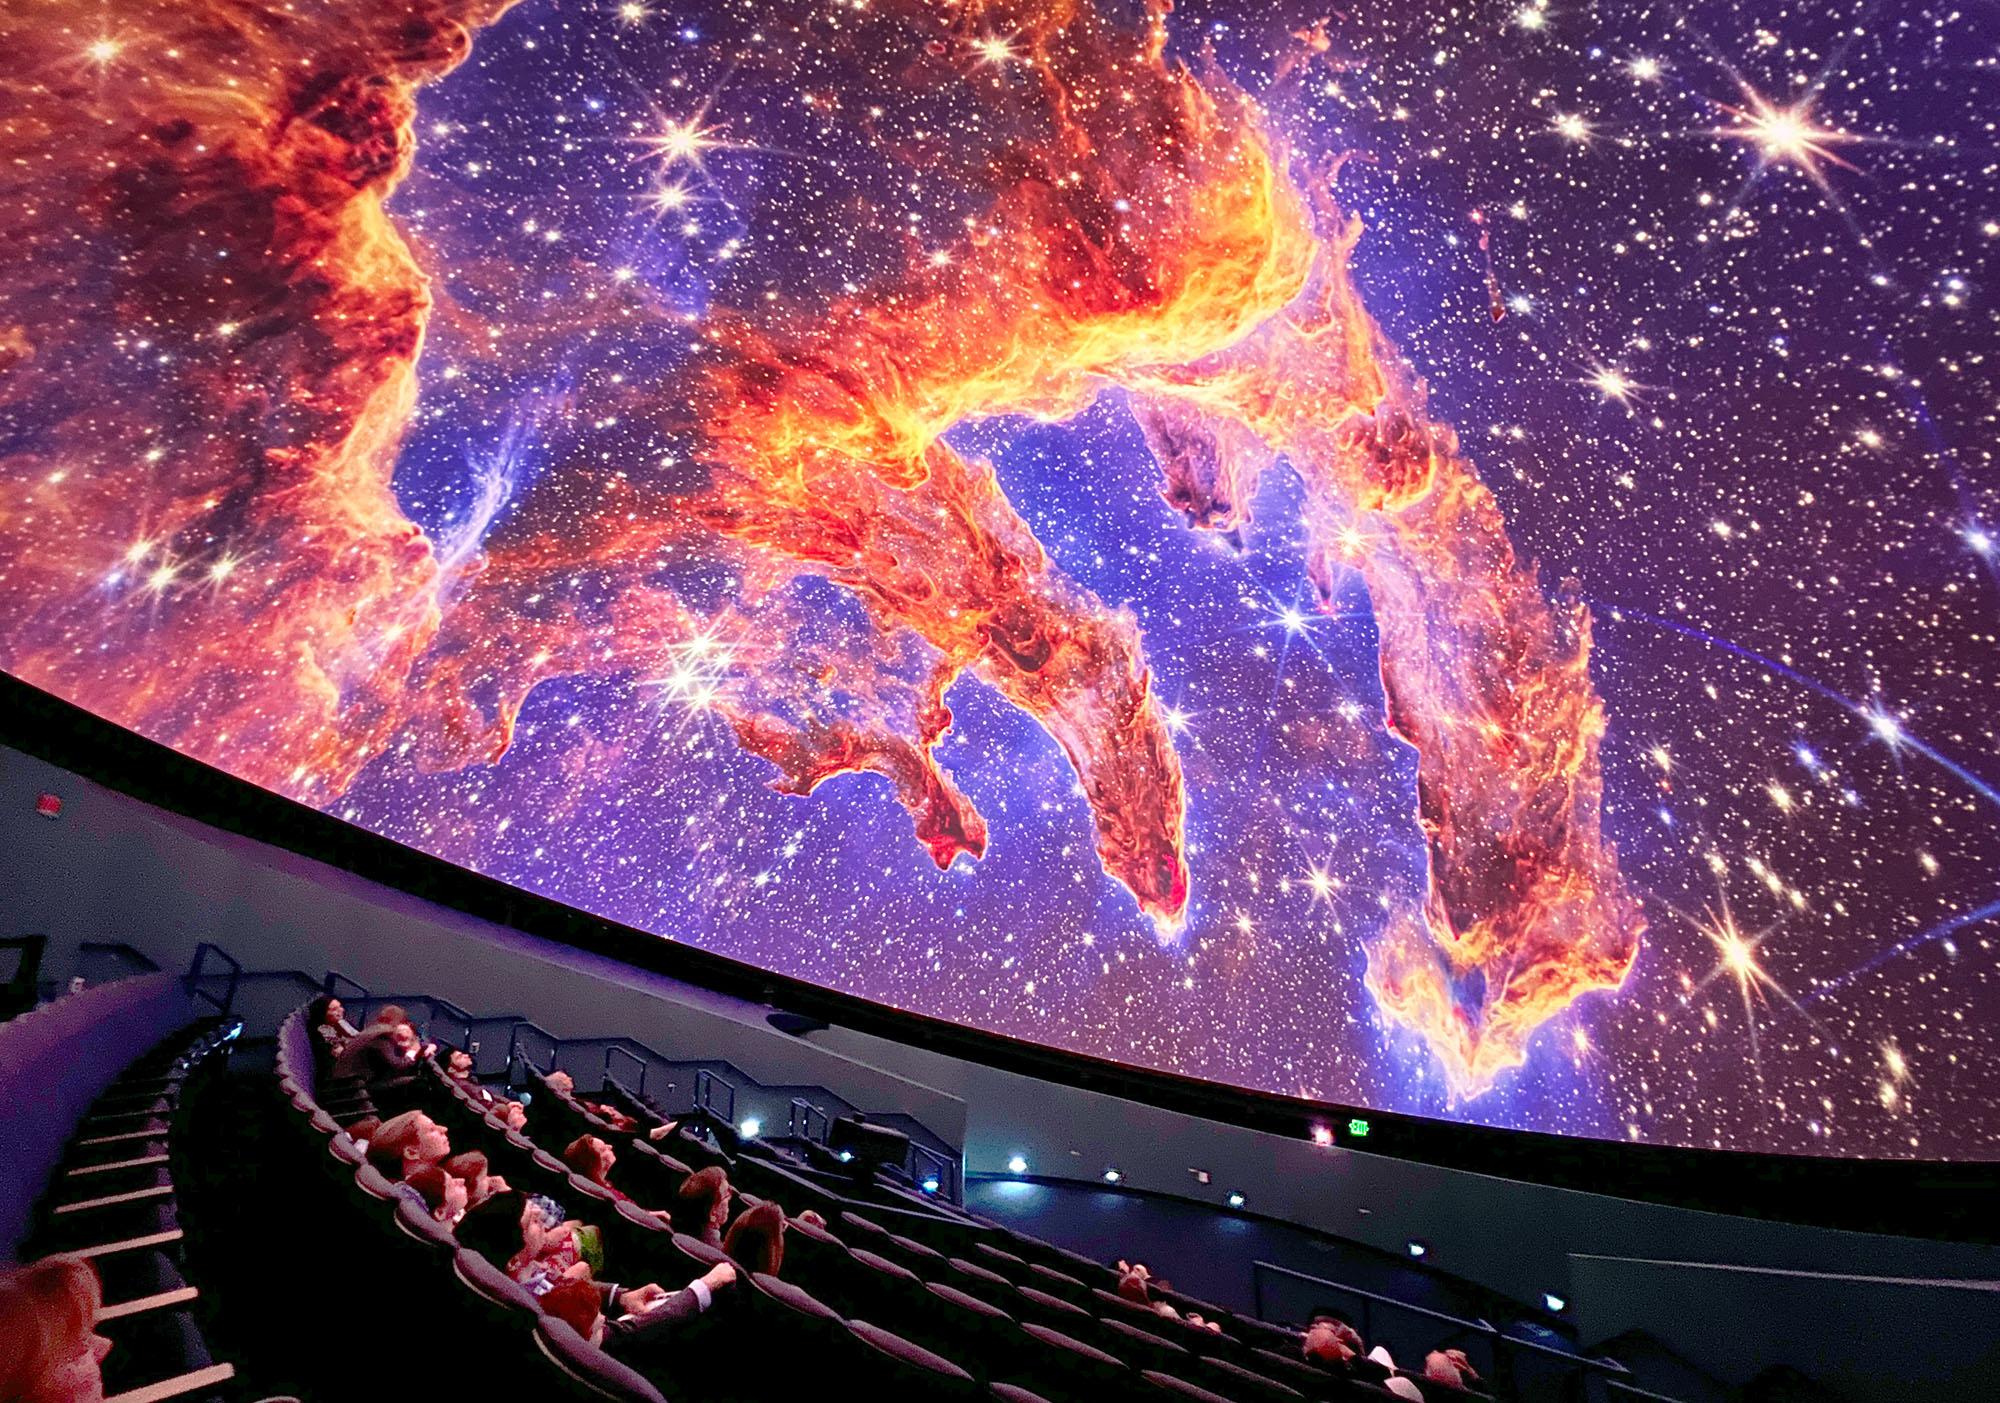 Guests in the planetarium dome look up at projection of the Pillars of Earth on the planetarium dome